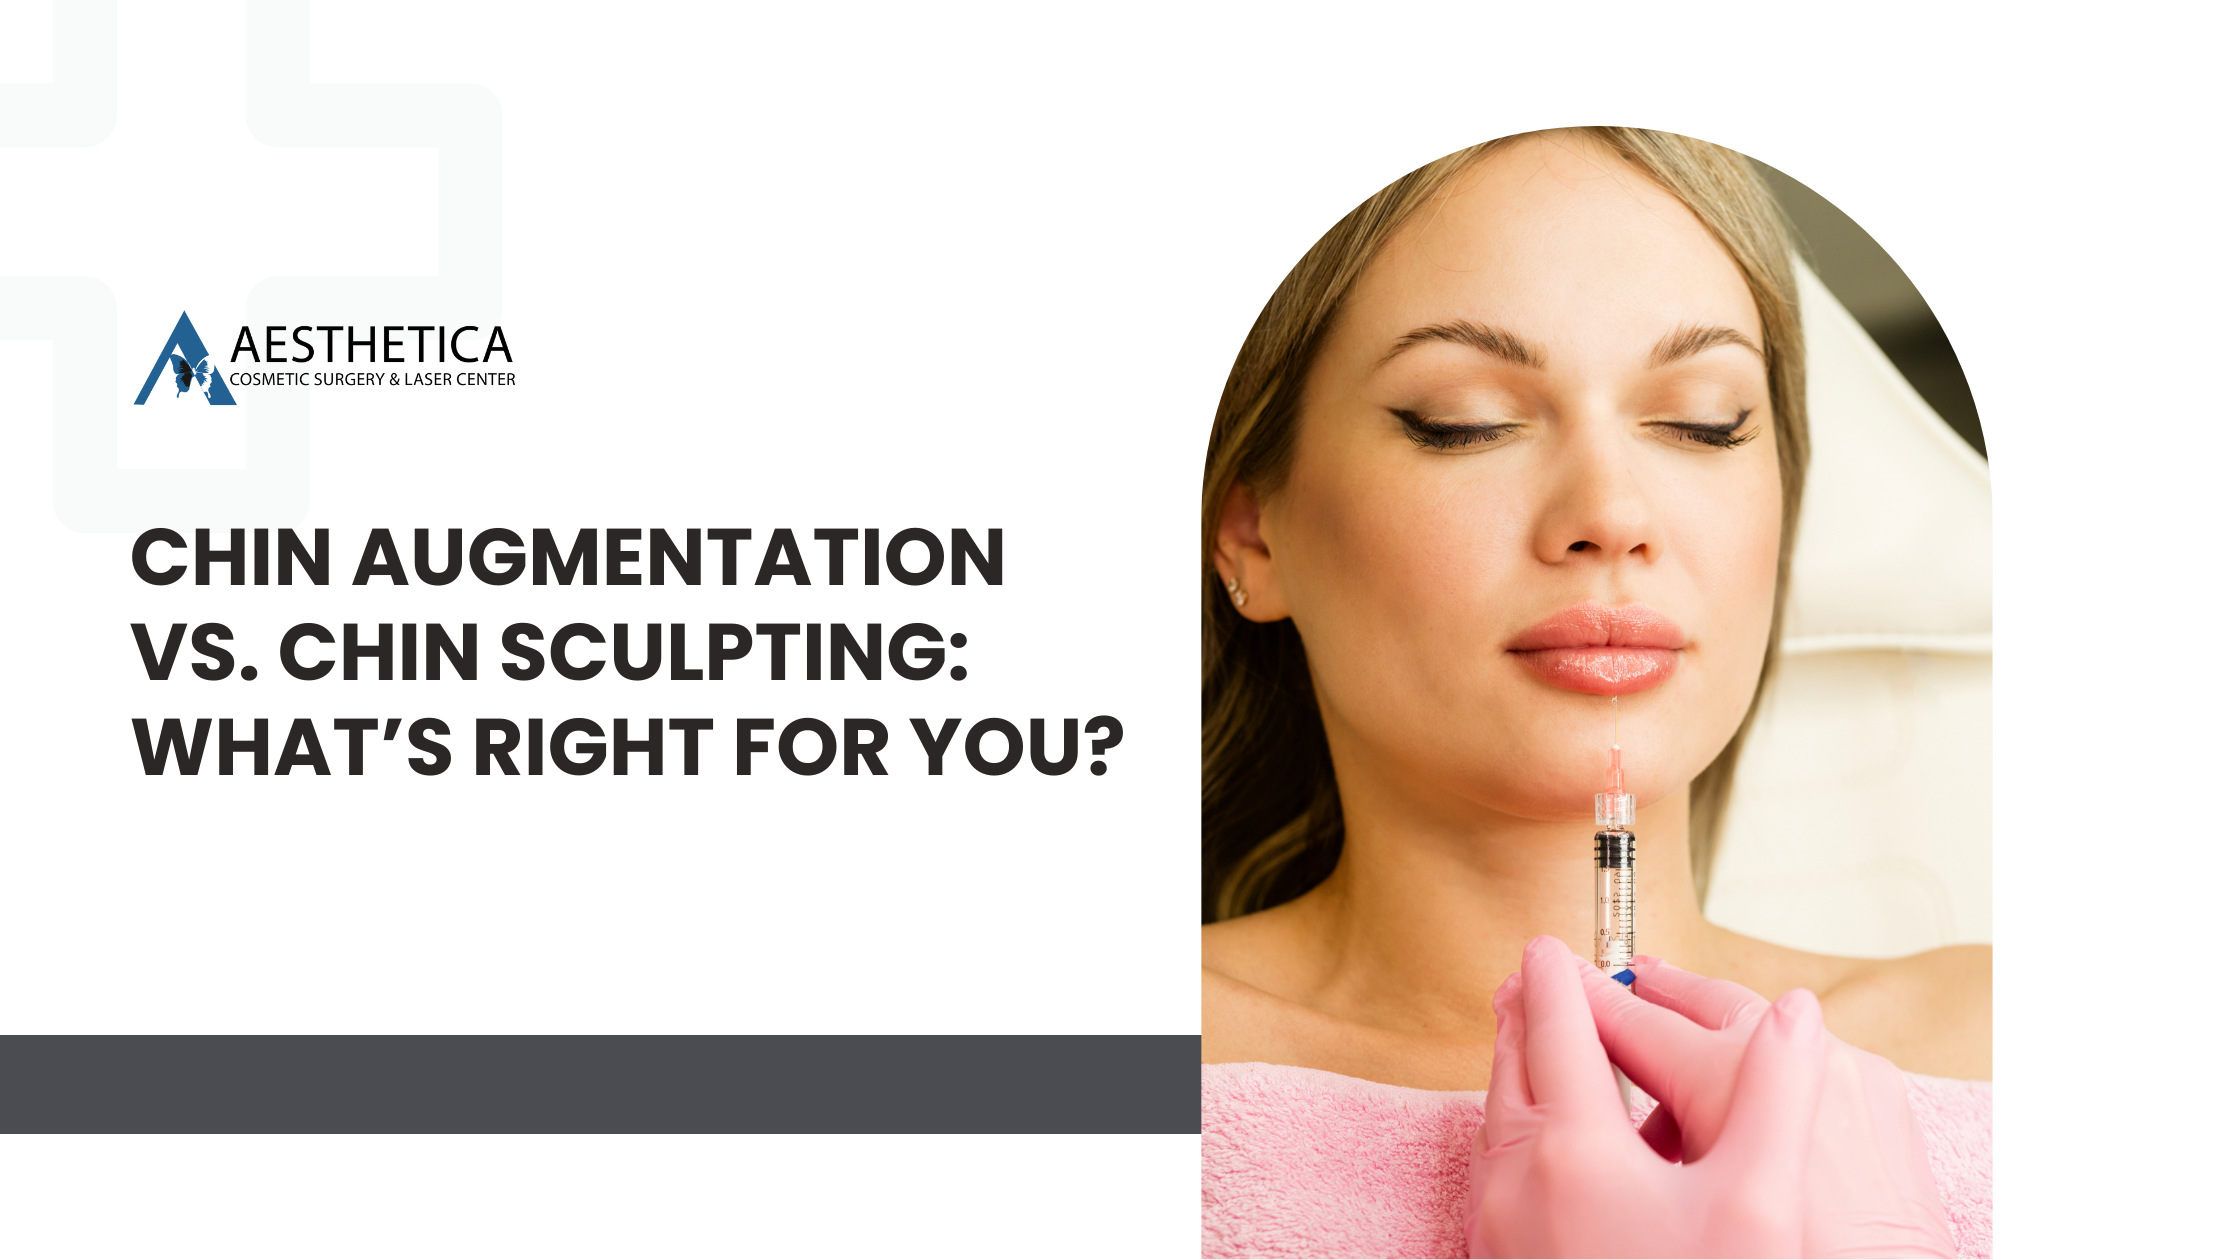 Chin Augmentation vs. Chin Sculpting: What’s Right for You?